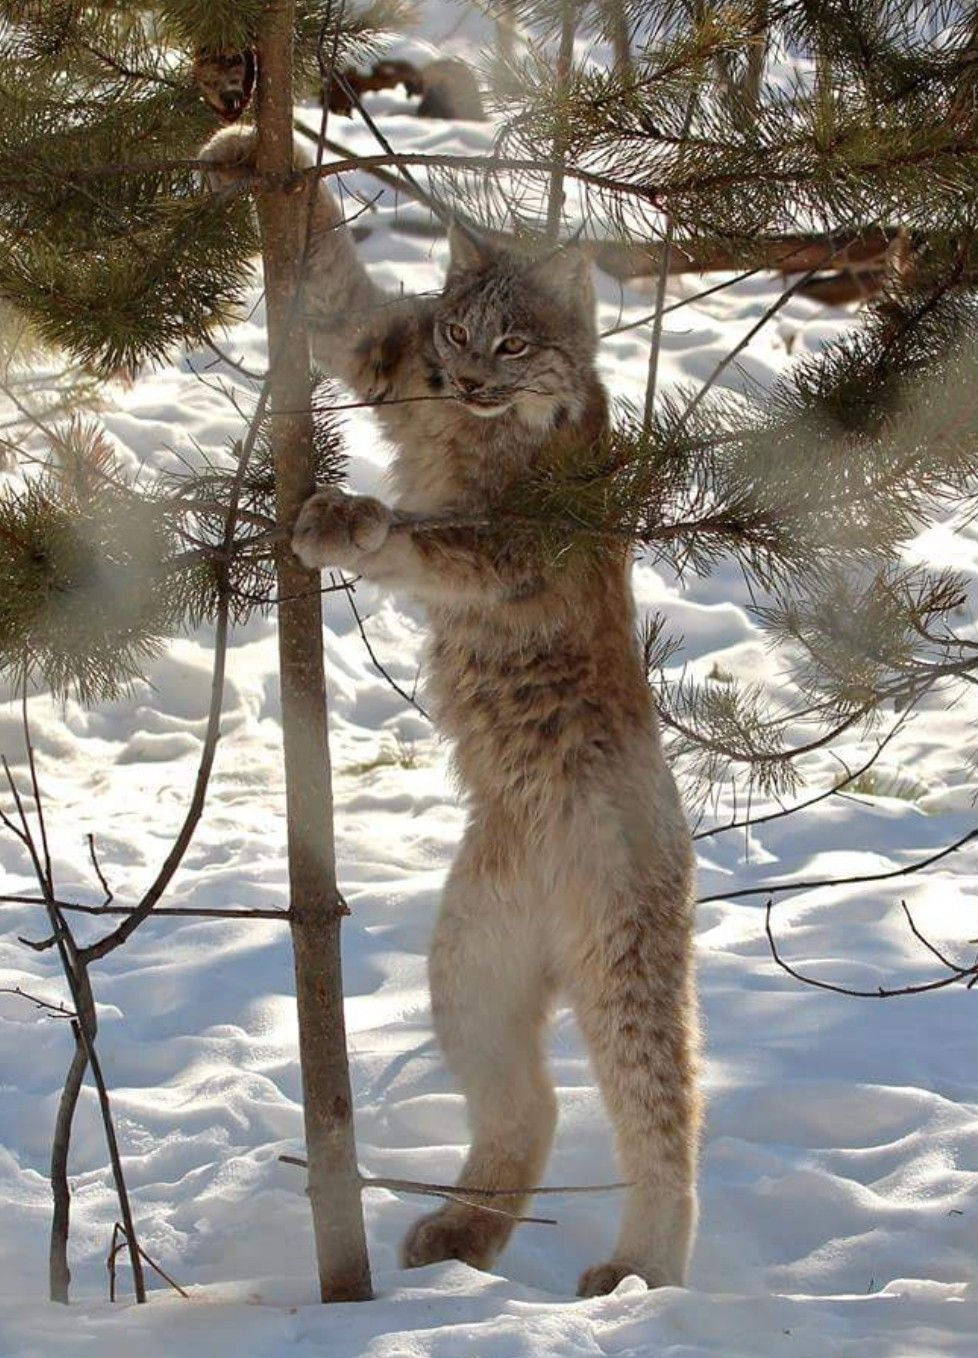 Take a picture of me like this - Lynx, Taiga, Winter, The photo, Posing, Cat family, Small cats, Animals